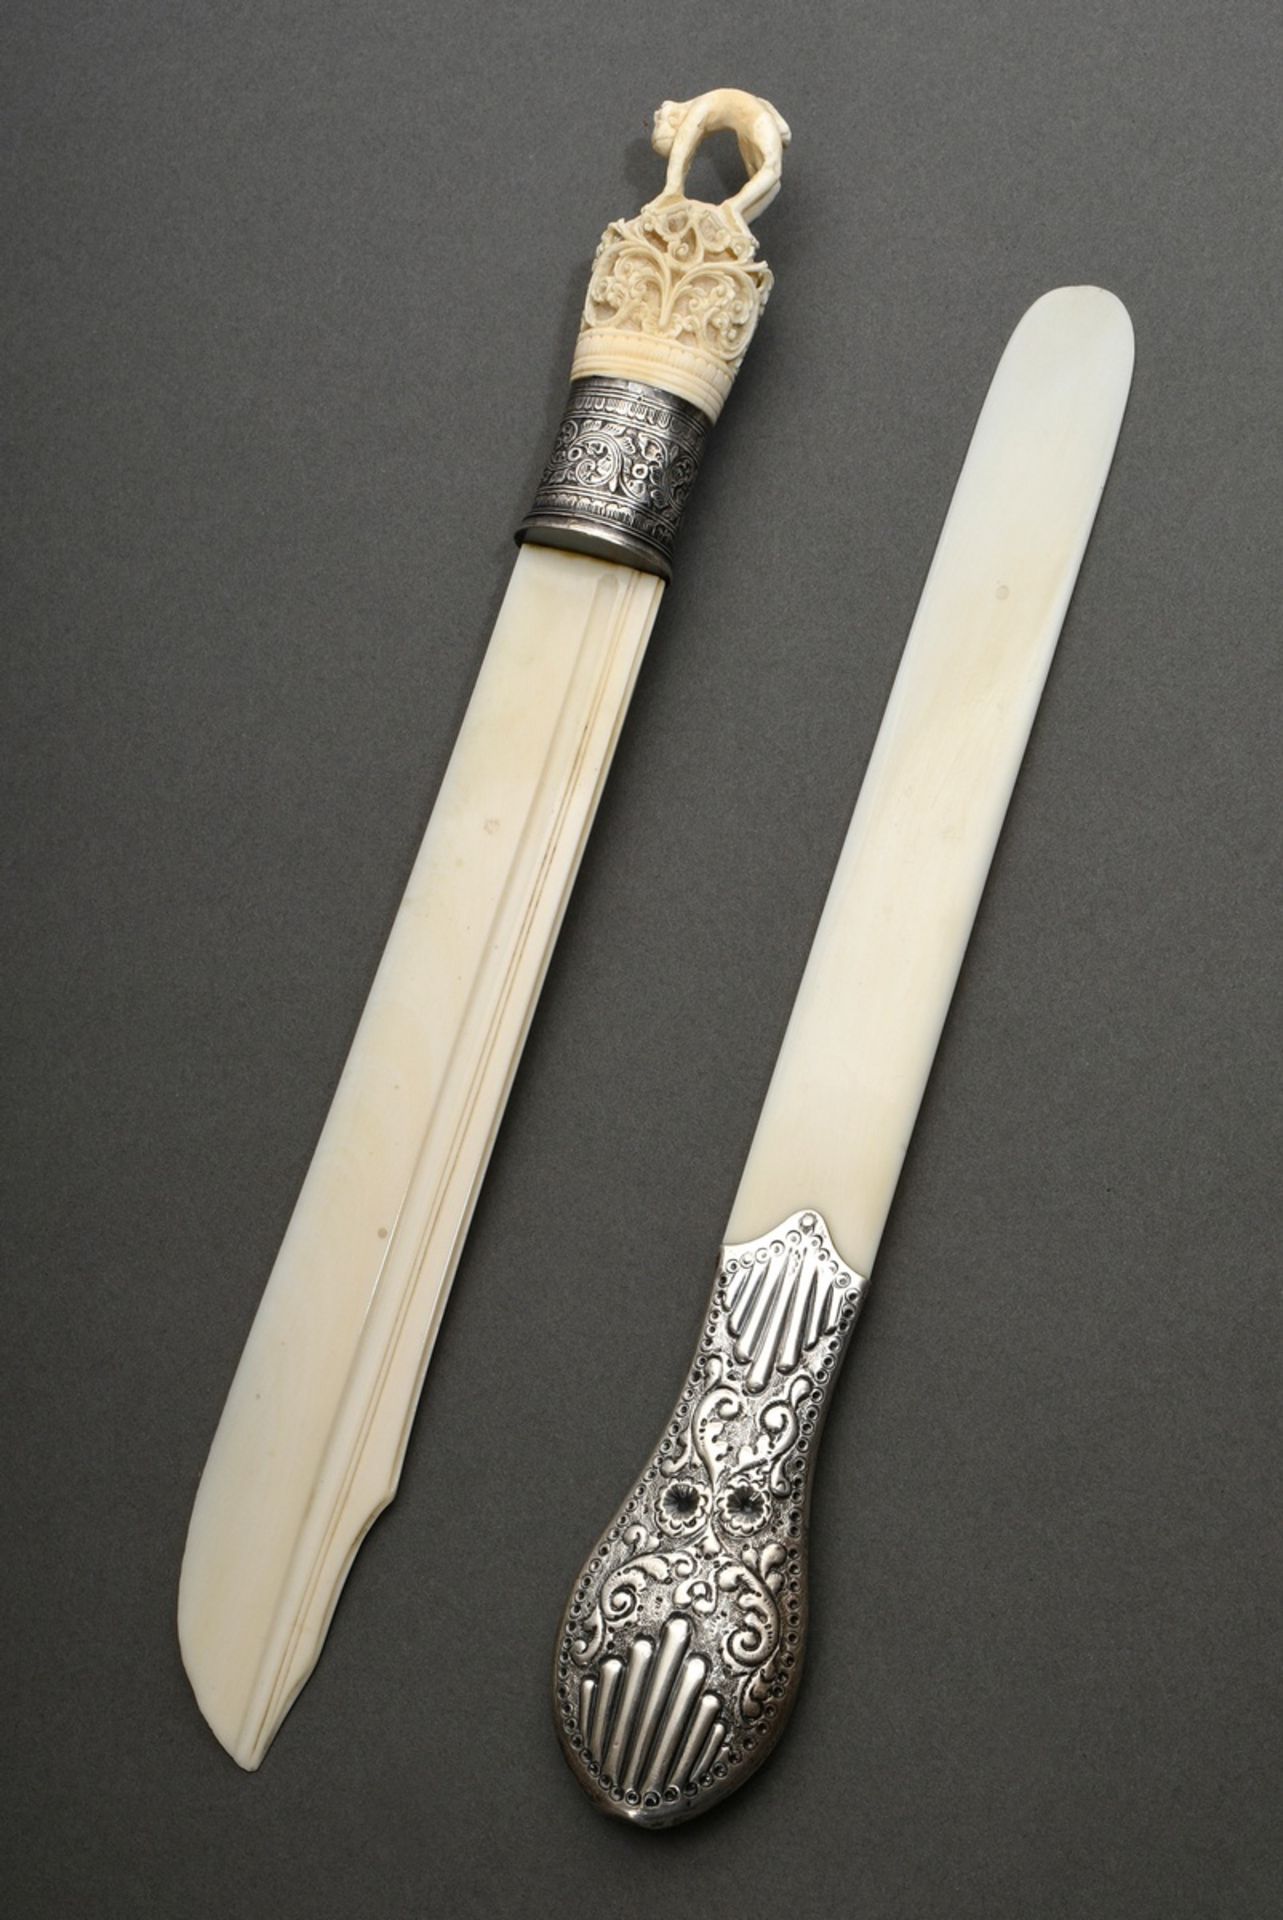 2 Various ivory letter openers, c. 1900: 1x with florally embossed silver handle (London 1890, l. 3